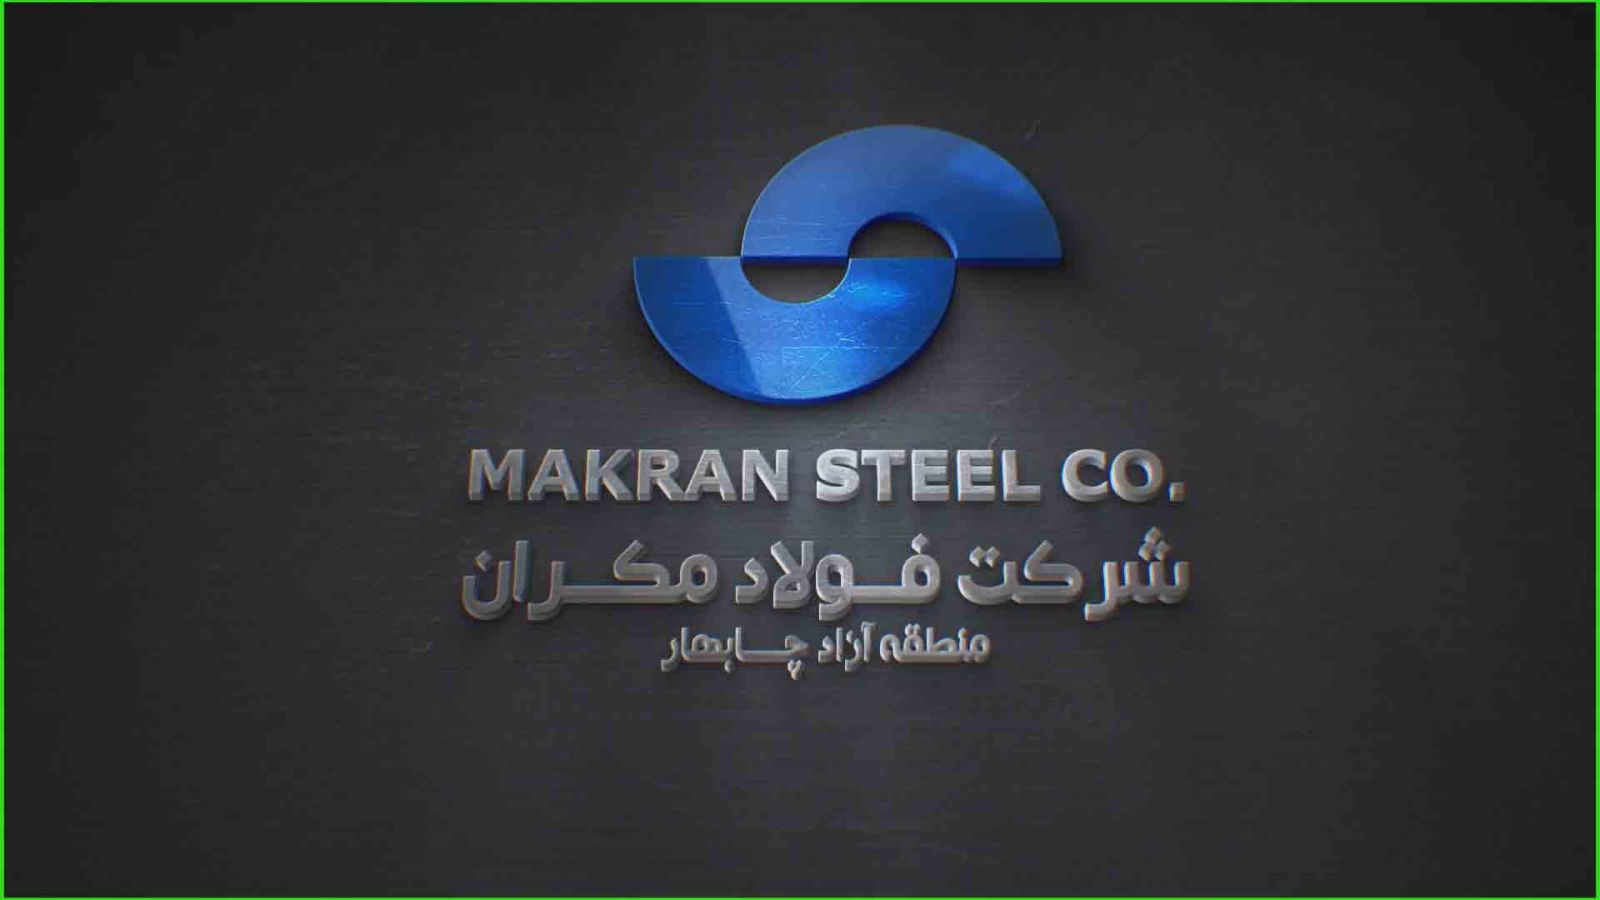 Makran steel needs infrastructure completion / currency credit of 135 million euros and 28,571,429 dollars to complete the project.